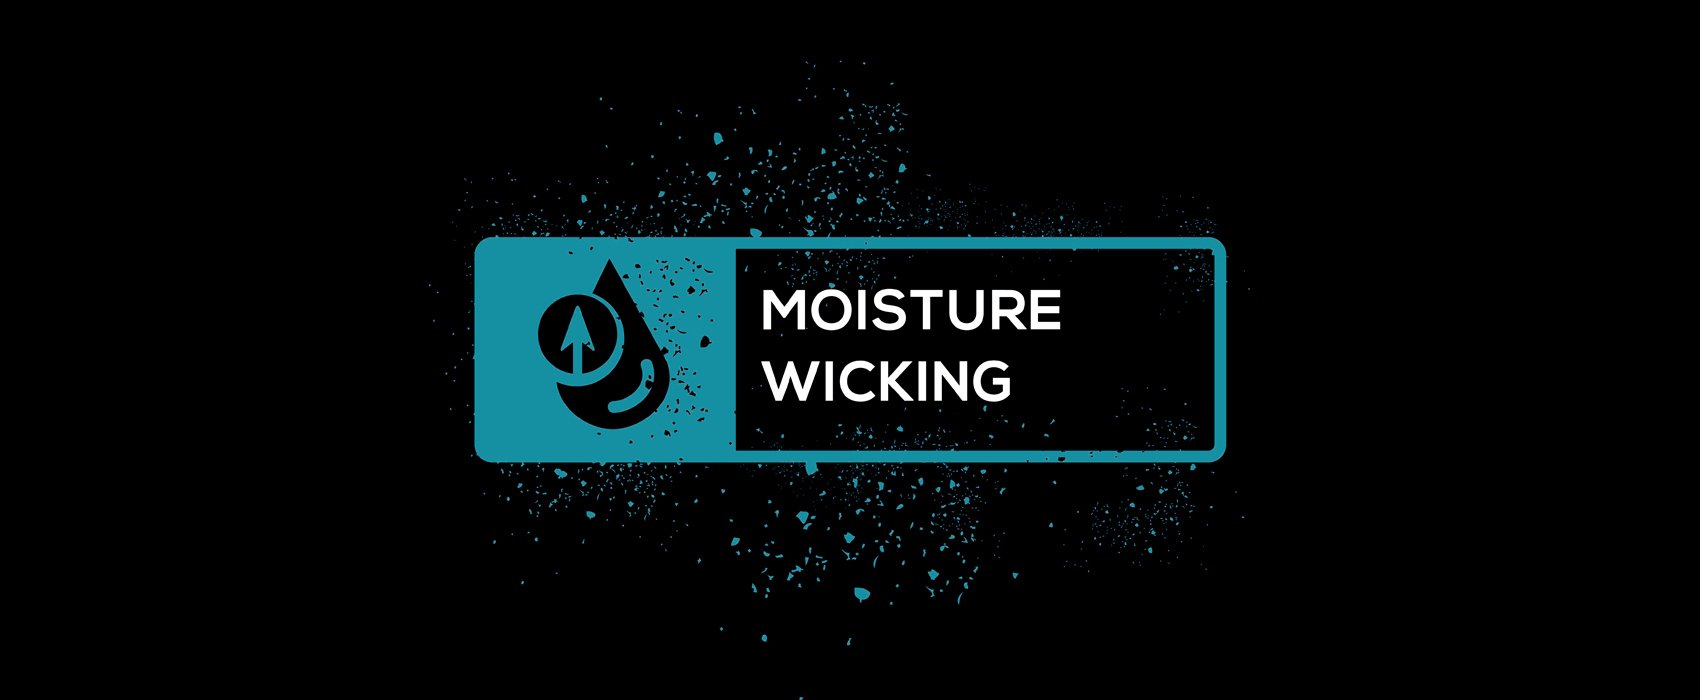 What is Moisture Wicking and Why is Everyone Talking About it